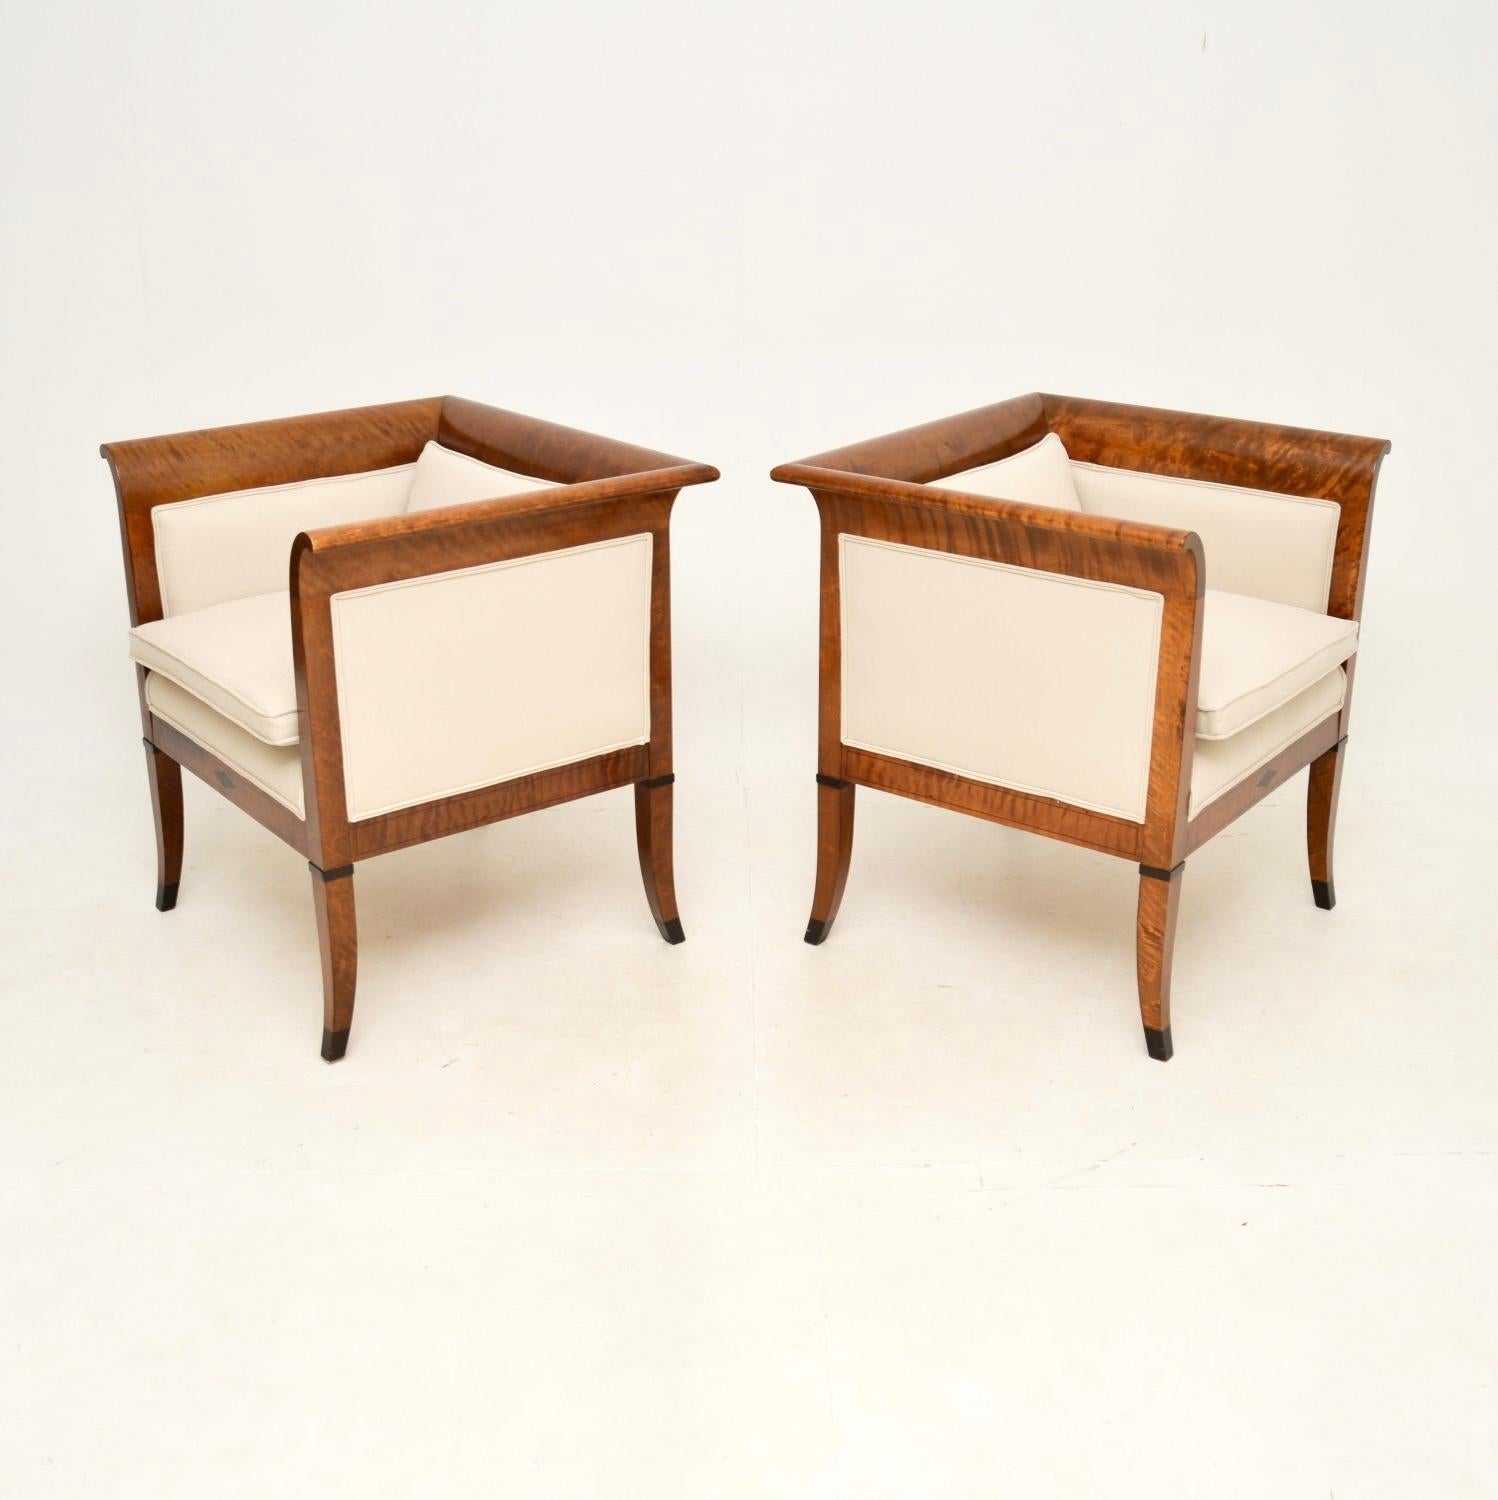 A stunning pair of antique Swedish satin birch Biedermeier armchairs. They were recently imported from Sweden and date from around the 1850-1870 period.

They are of superb quality, with a beautiful and refined design. The satin wood frames have